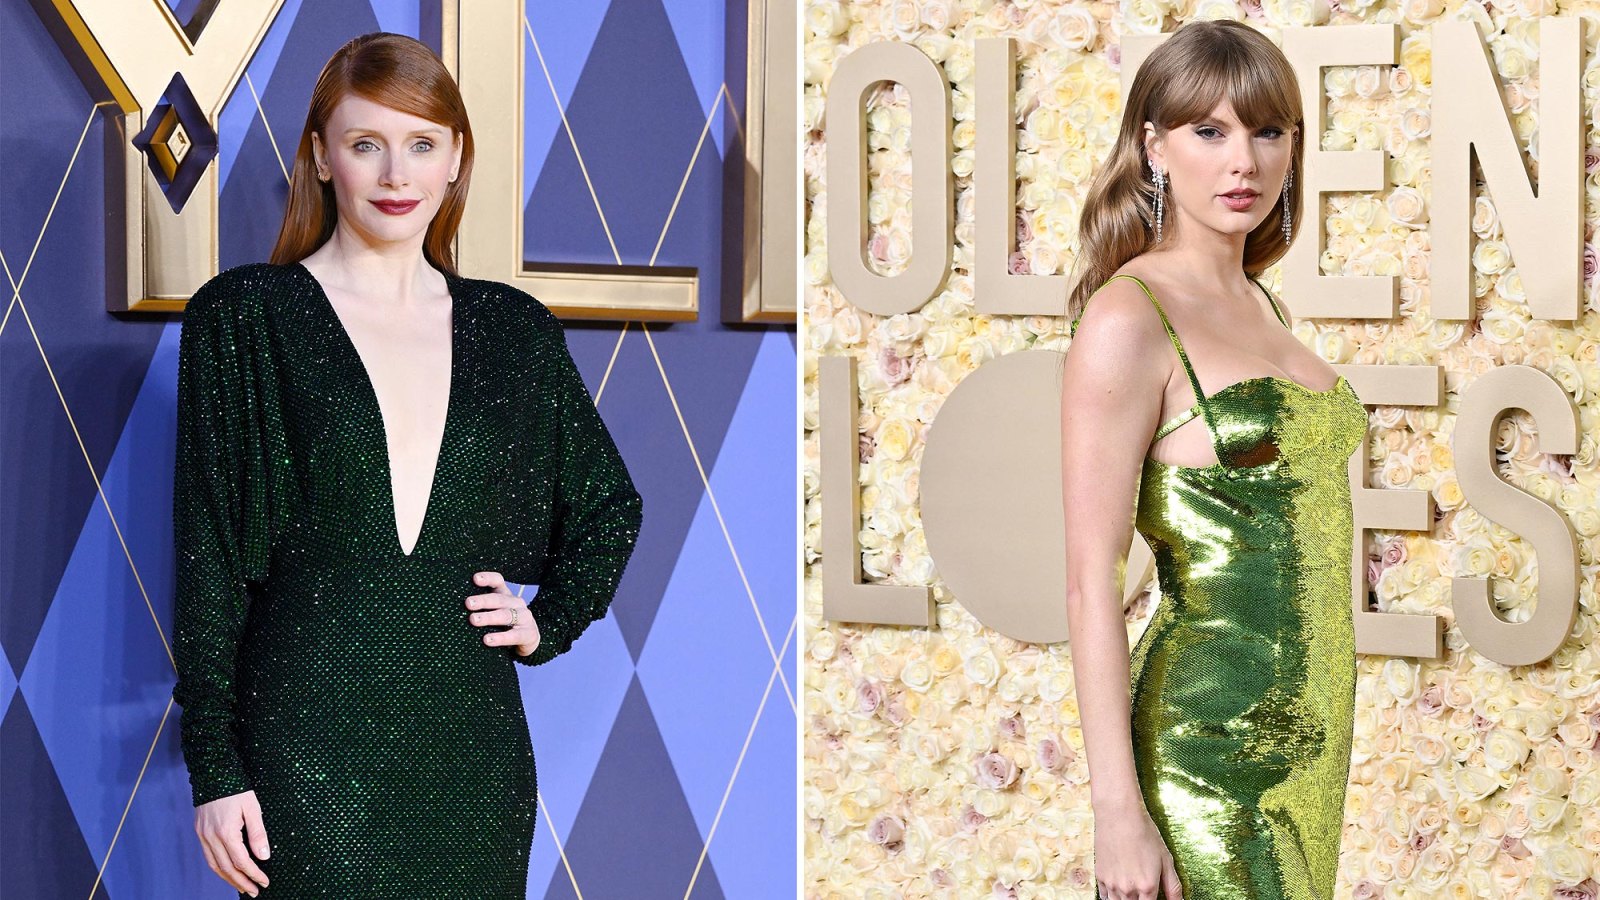 Bryce Dallas Howard Says Taylor Swift Served as Great Inspiration for Her Argylle Character